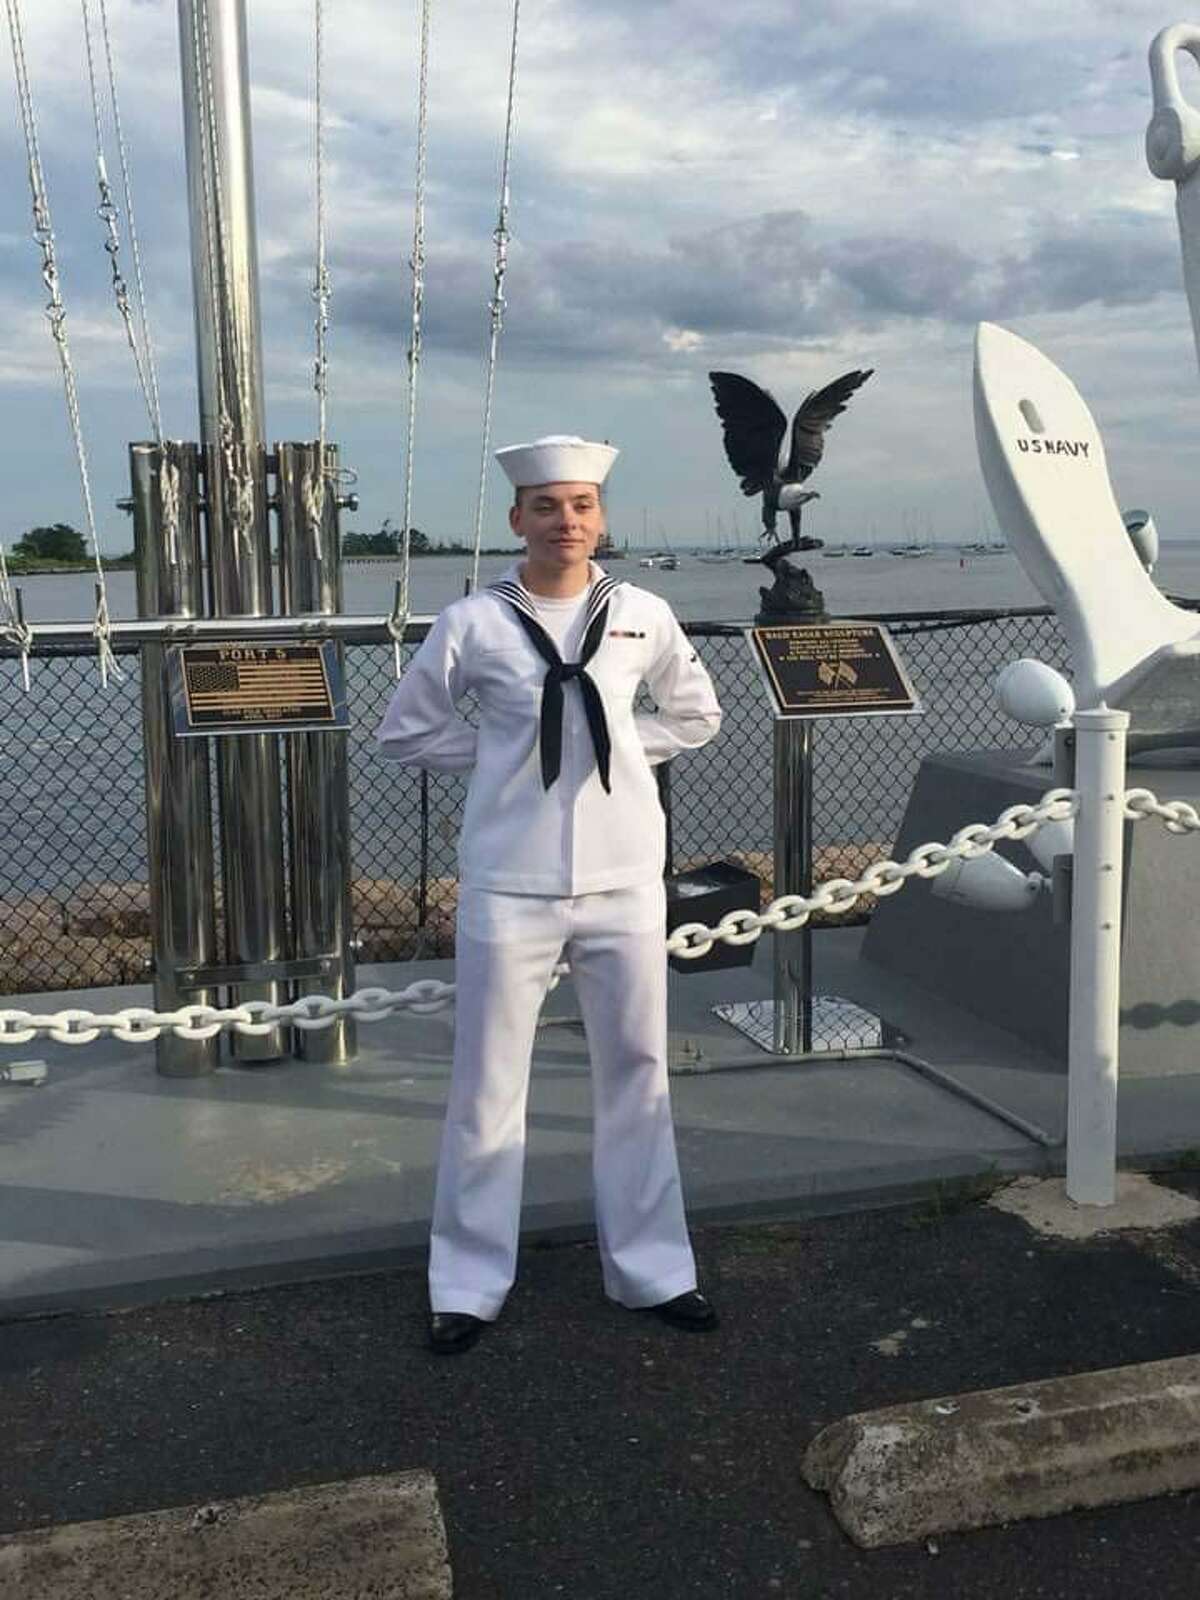 A photo of Jillian Cowell, the daughter of a former Seymour fire lieutenant who was shot three times on her naval base in Virginia on April 5, 2019. The photo was provided on a Facebook fundraiser for her.